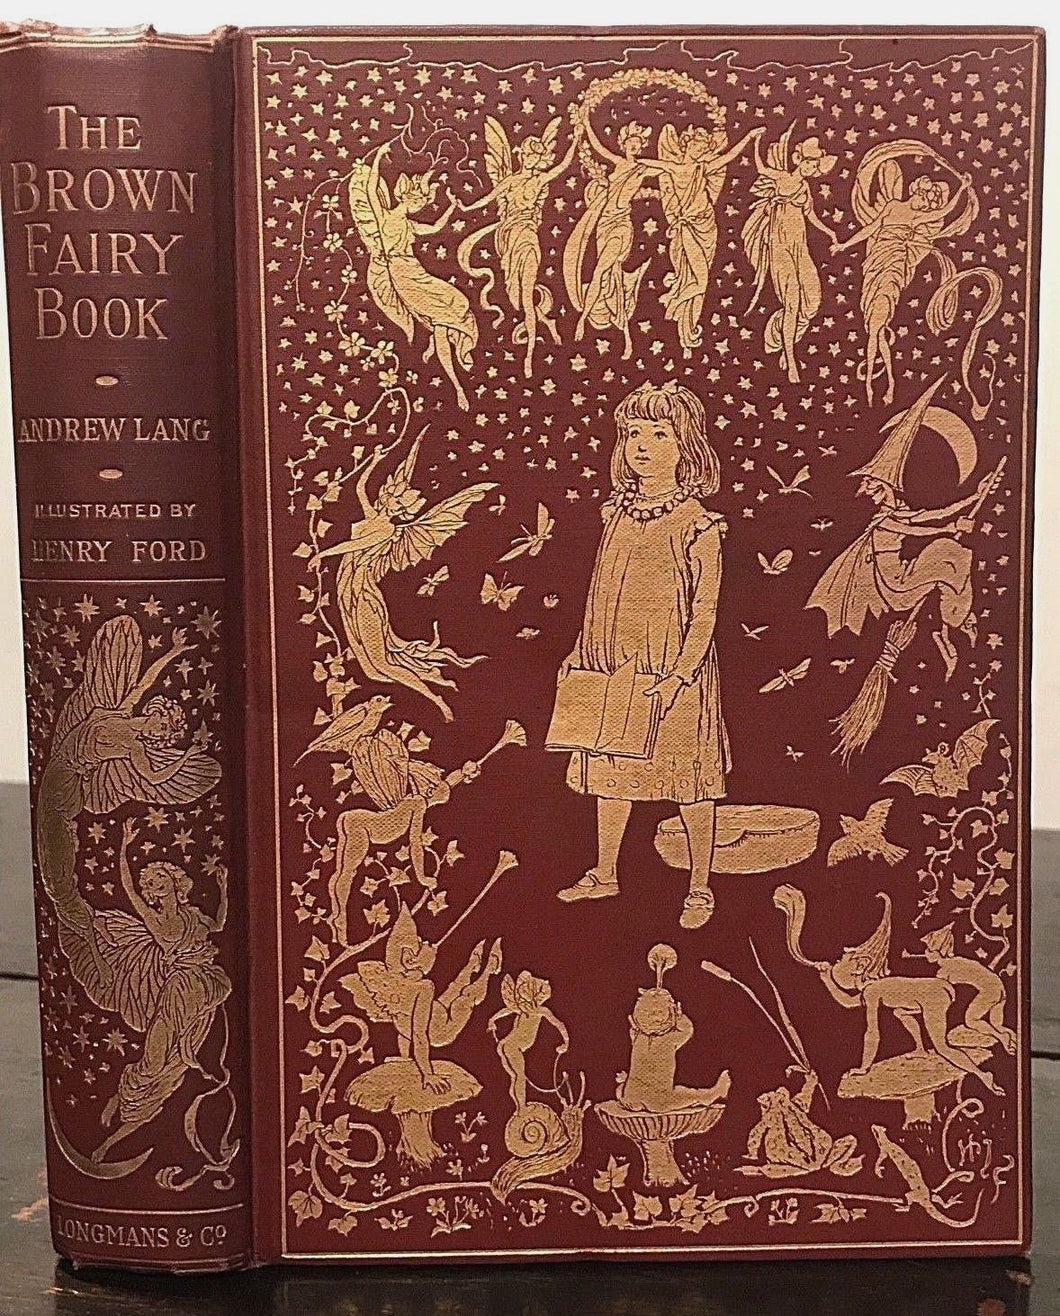 THE BROWN FAIRY BOOK - ANDREW LANG, H.J. Ford Color Plates - First UK Ed, 1904